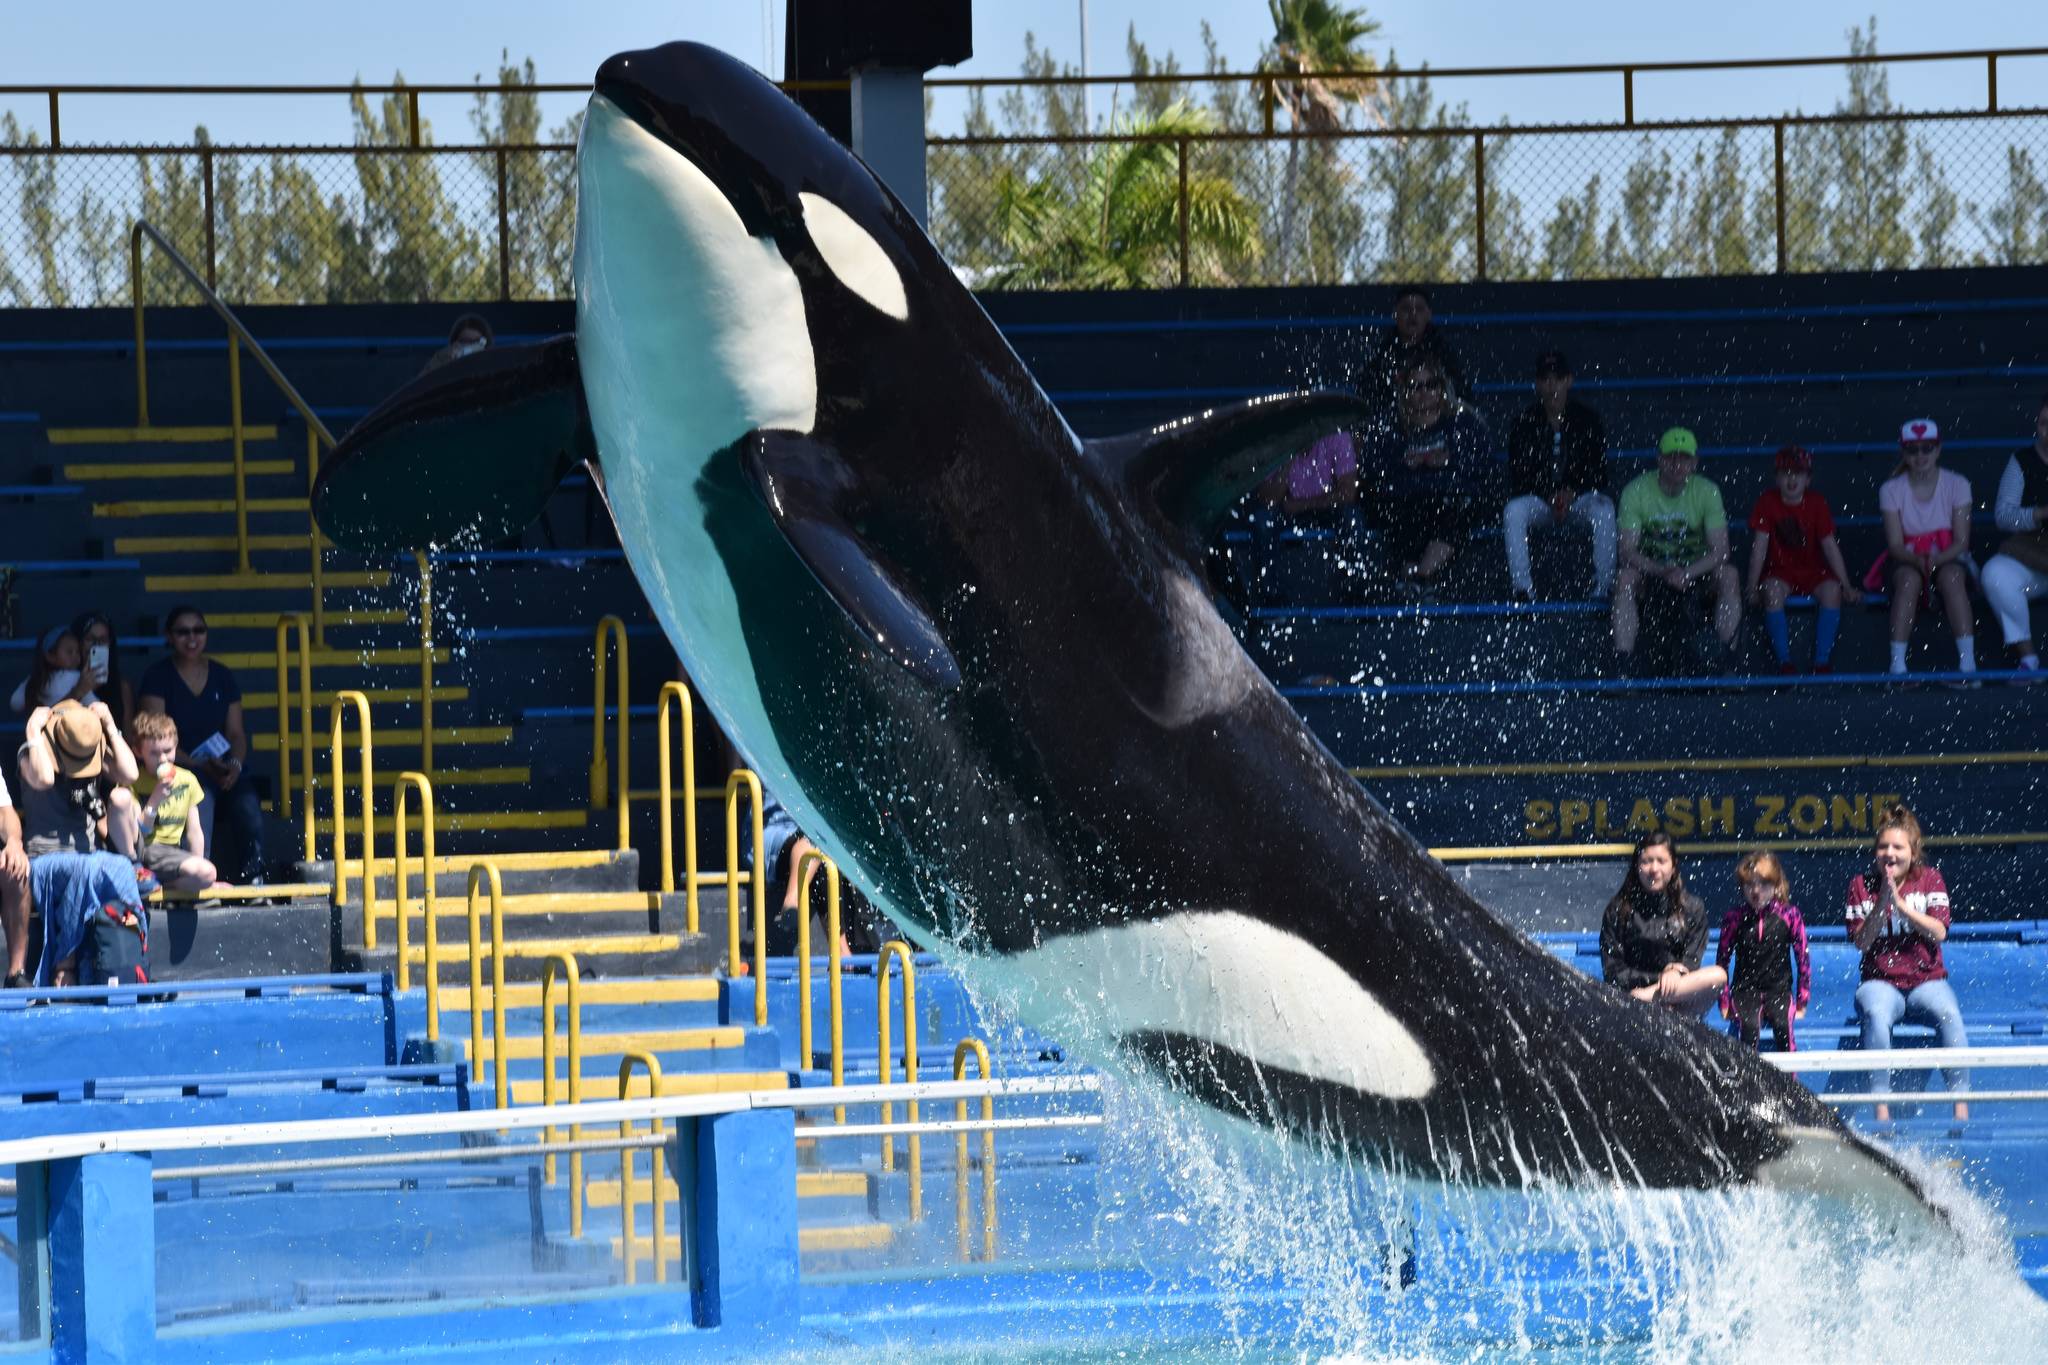 Lolita, now about 54-years-old, is doing tricks for an ever-dwindling crowd at Miami’s Seaquarium. Photo by Ingrid N. Visser, Orca Research Trust